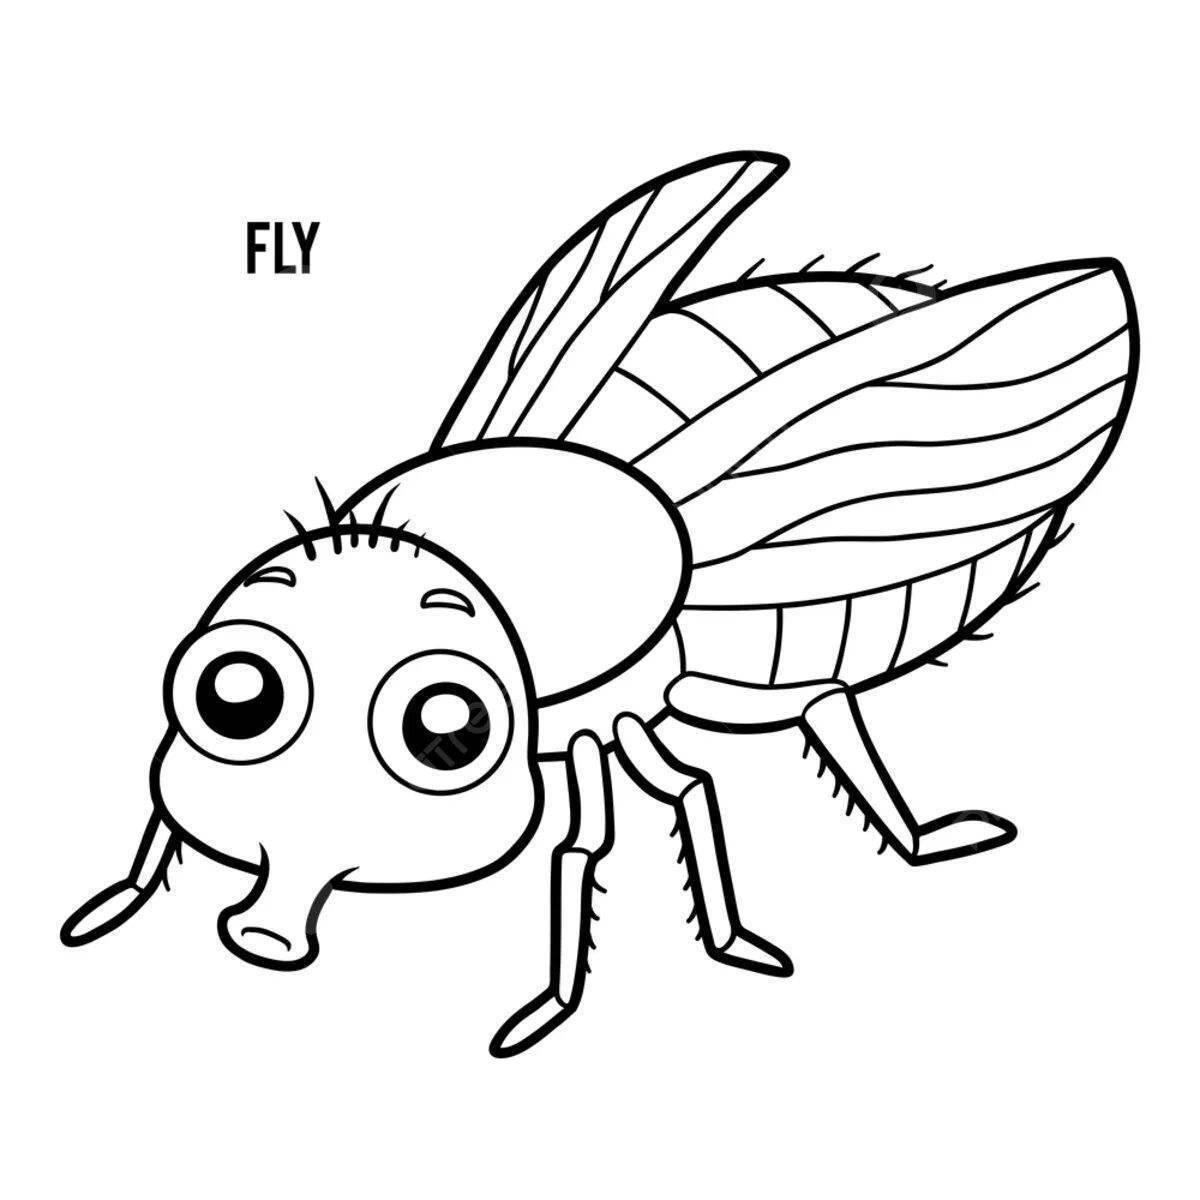 Sweet fly coloring book for kids